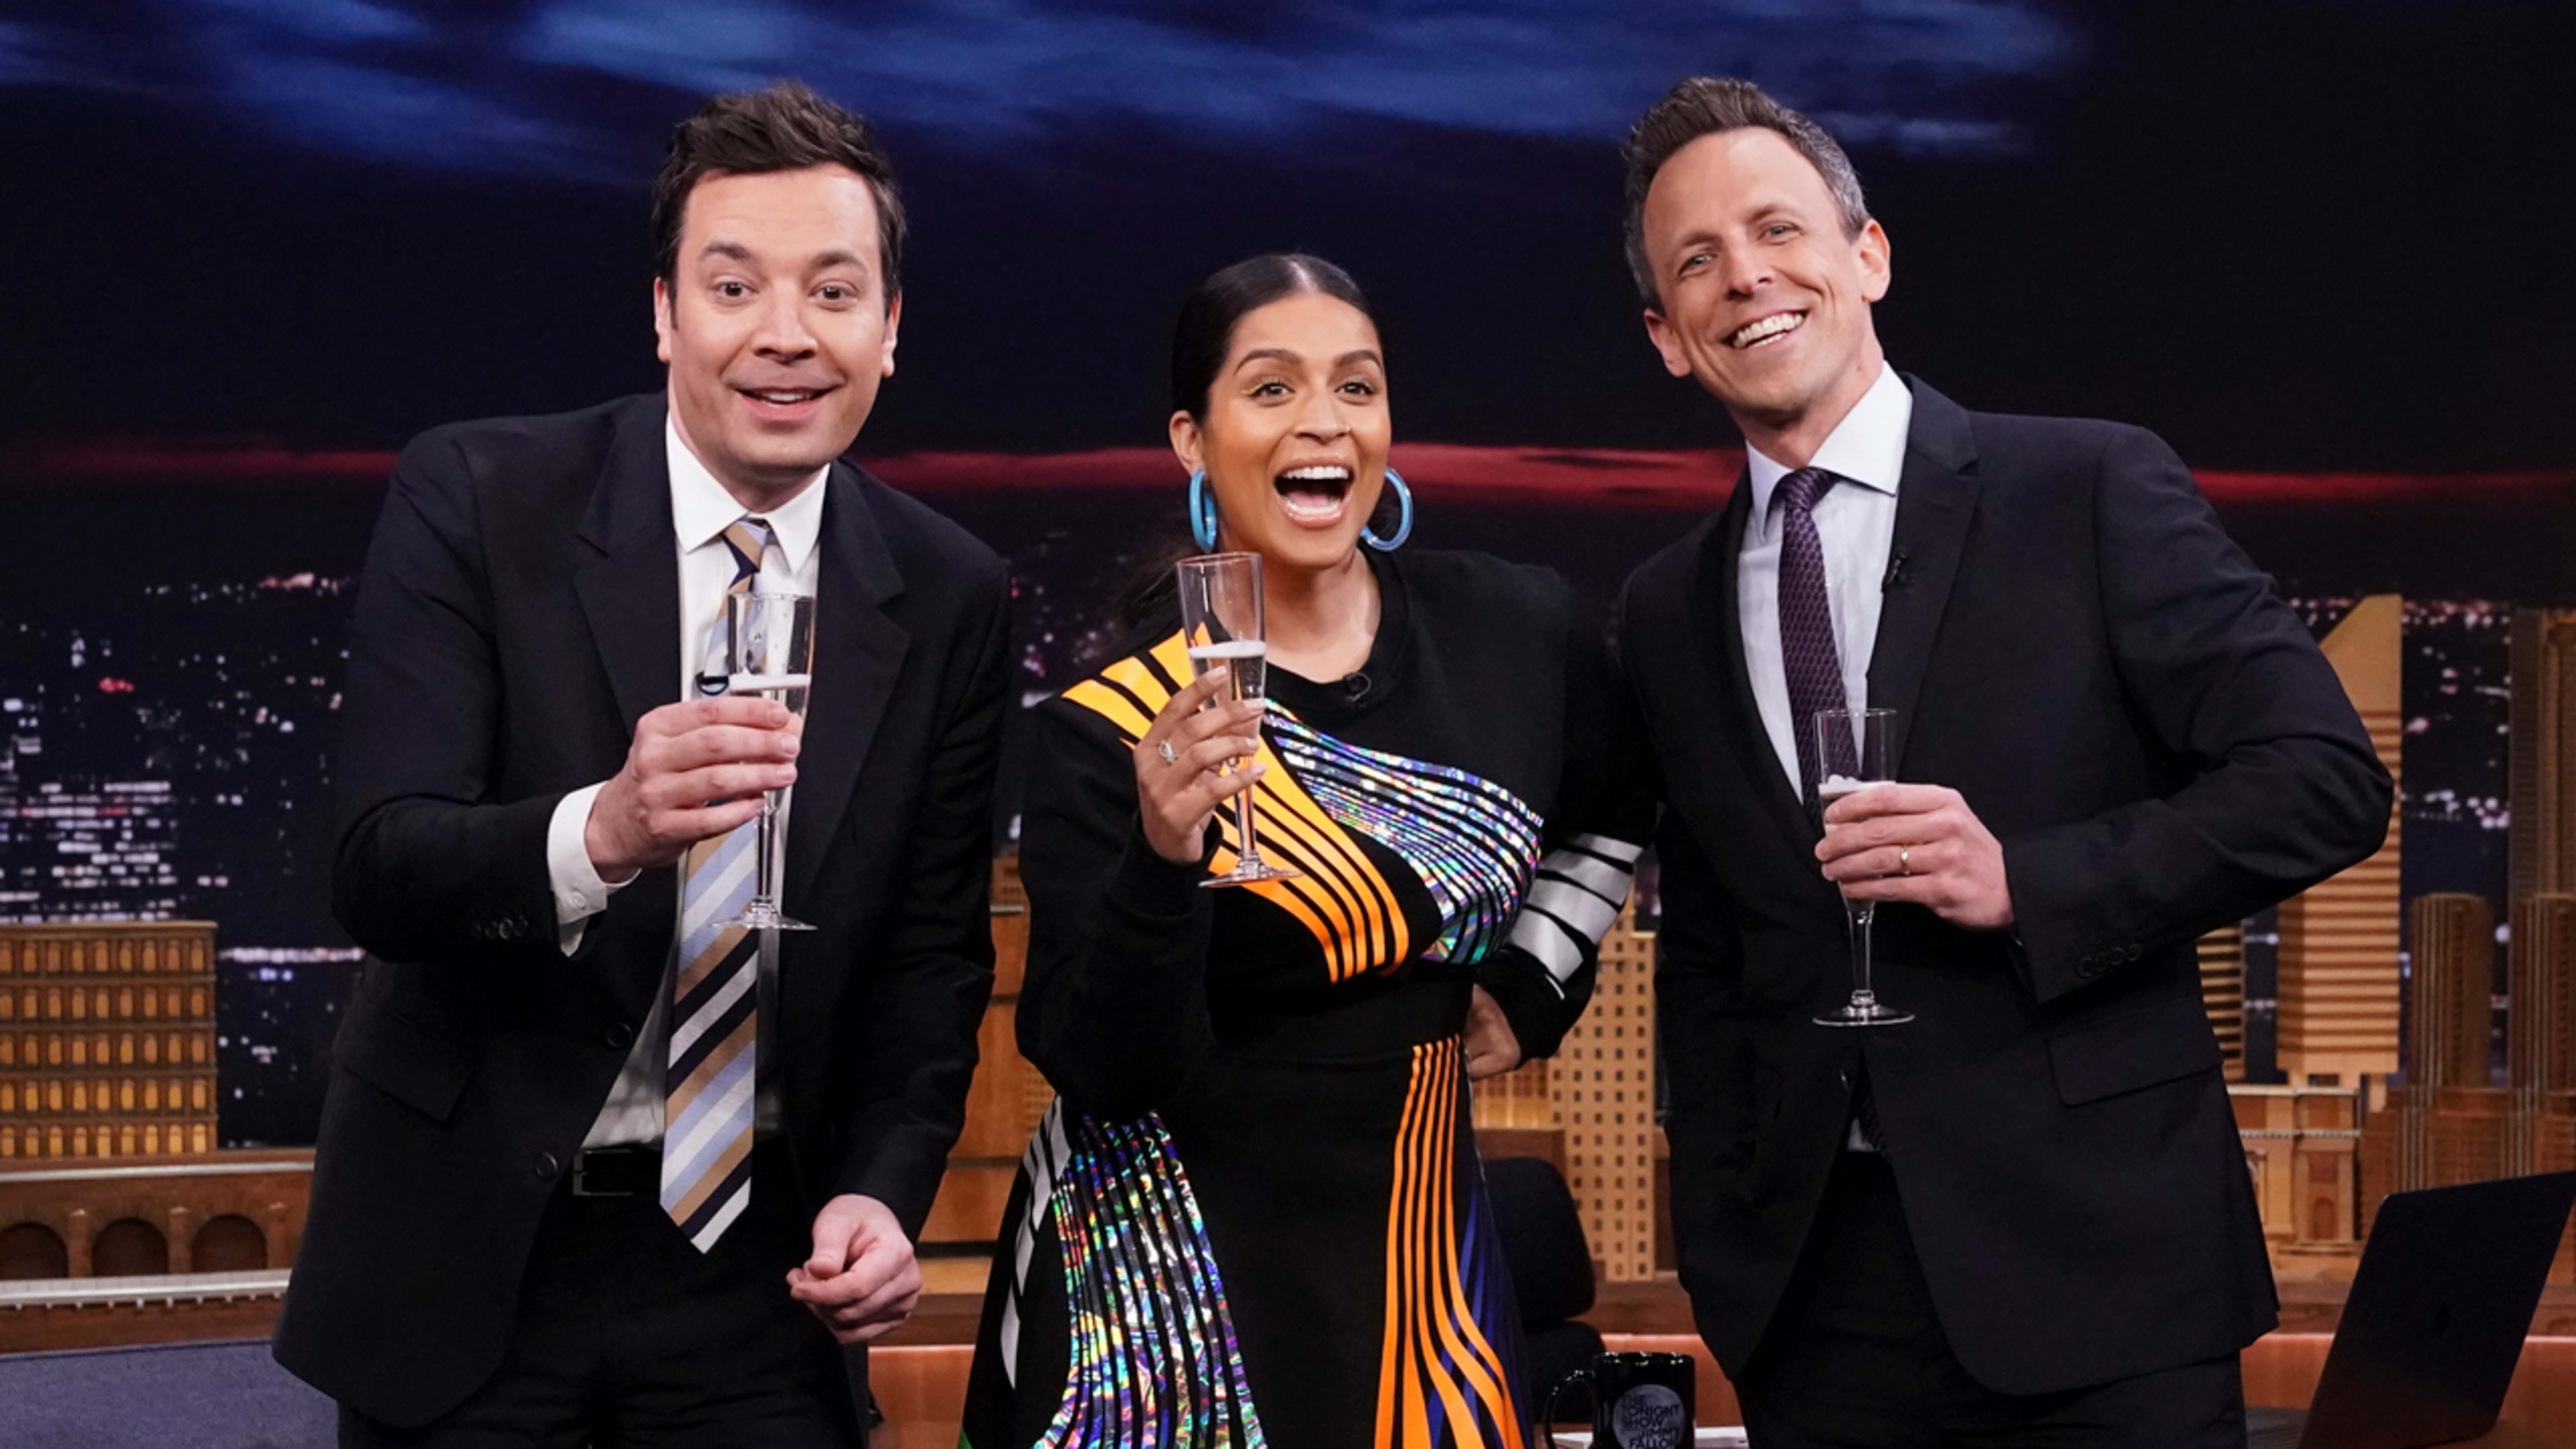 YouTube star Lilly Singh to replace Carson Daly with her own late-night NBC show